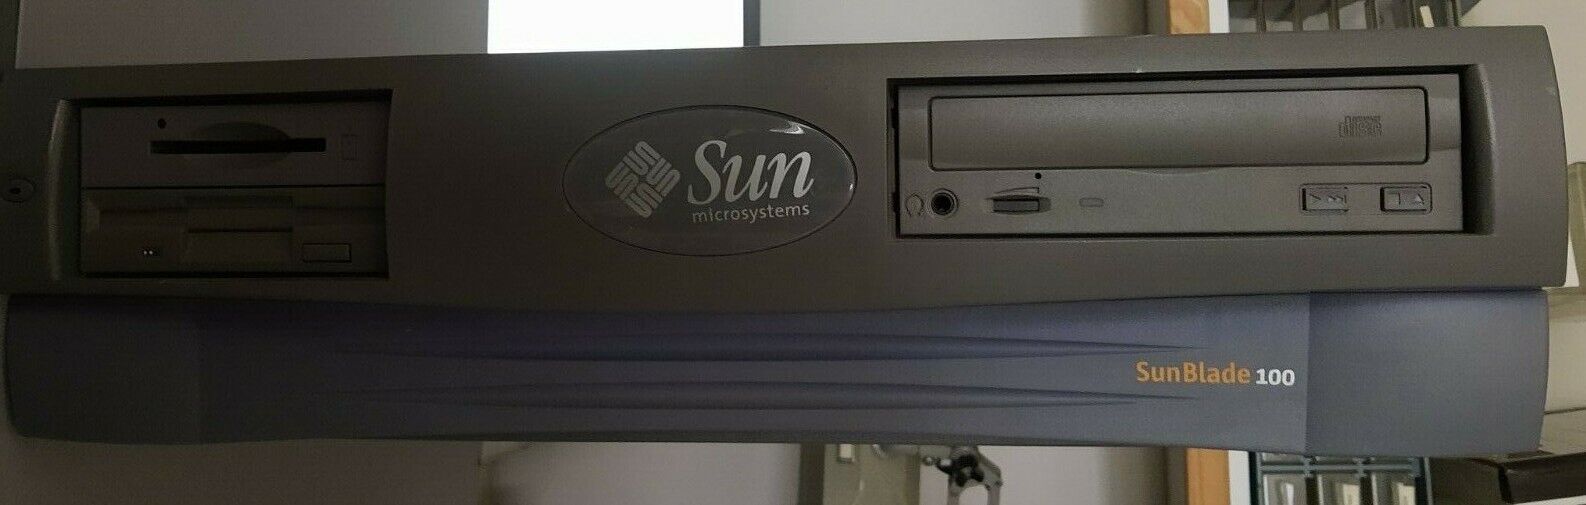 Vintage Sun MicroSystems SunBlade 100 with 1280MB RAM and 15GB HDD 